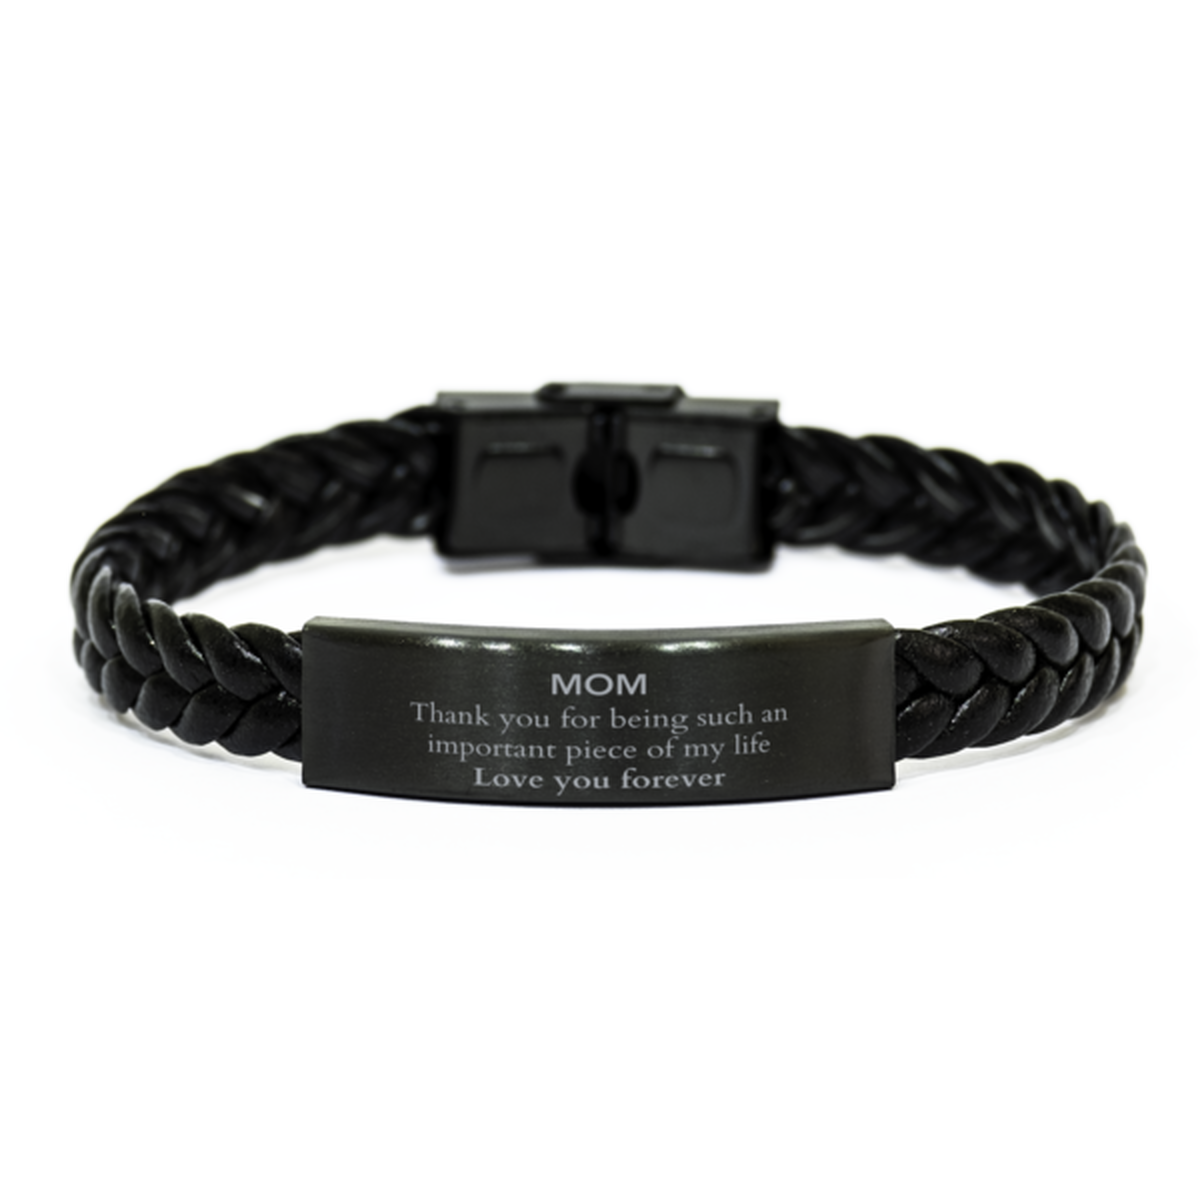 Appropriate Mom Braided Leather Bracelet Epic Birthday Gifts for Mom Thank you for being such an important piece of my life Mom Christmas Mothers Fathers Day